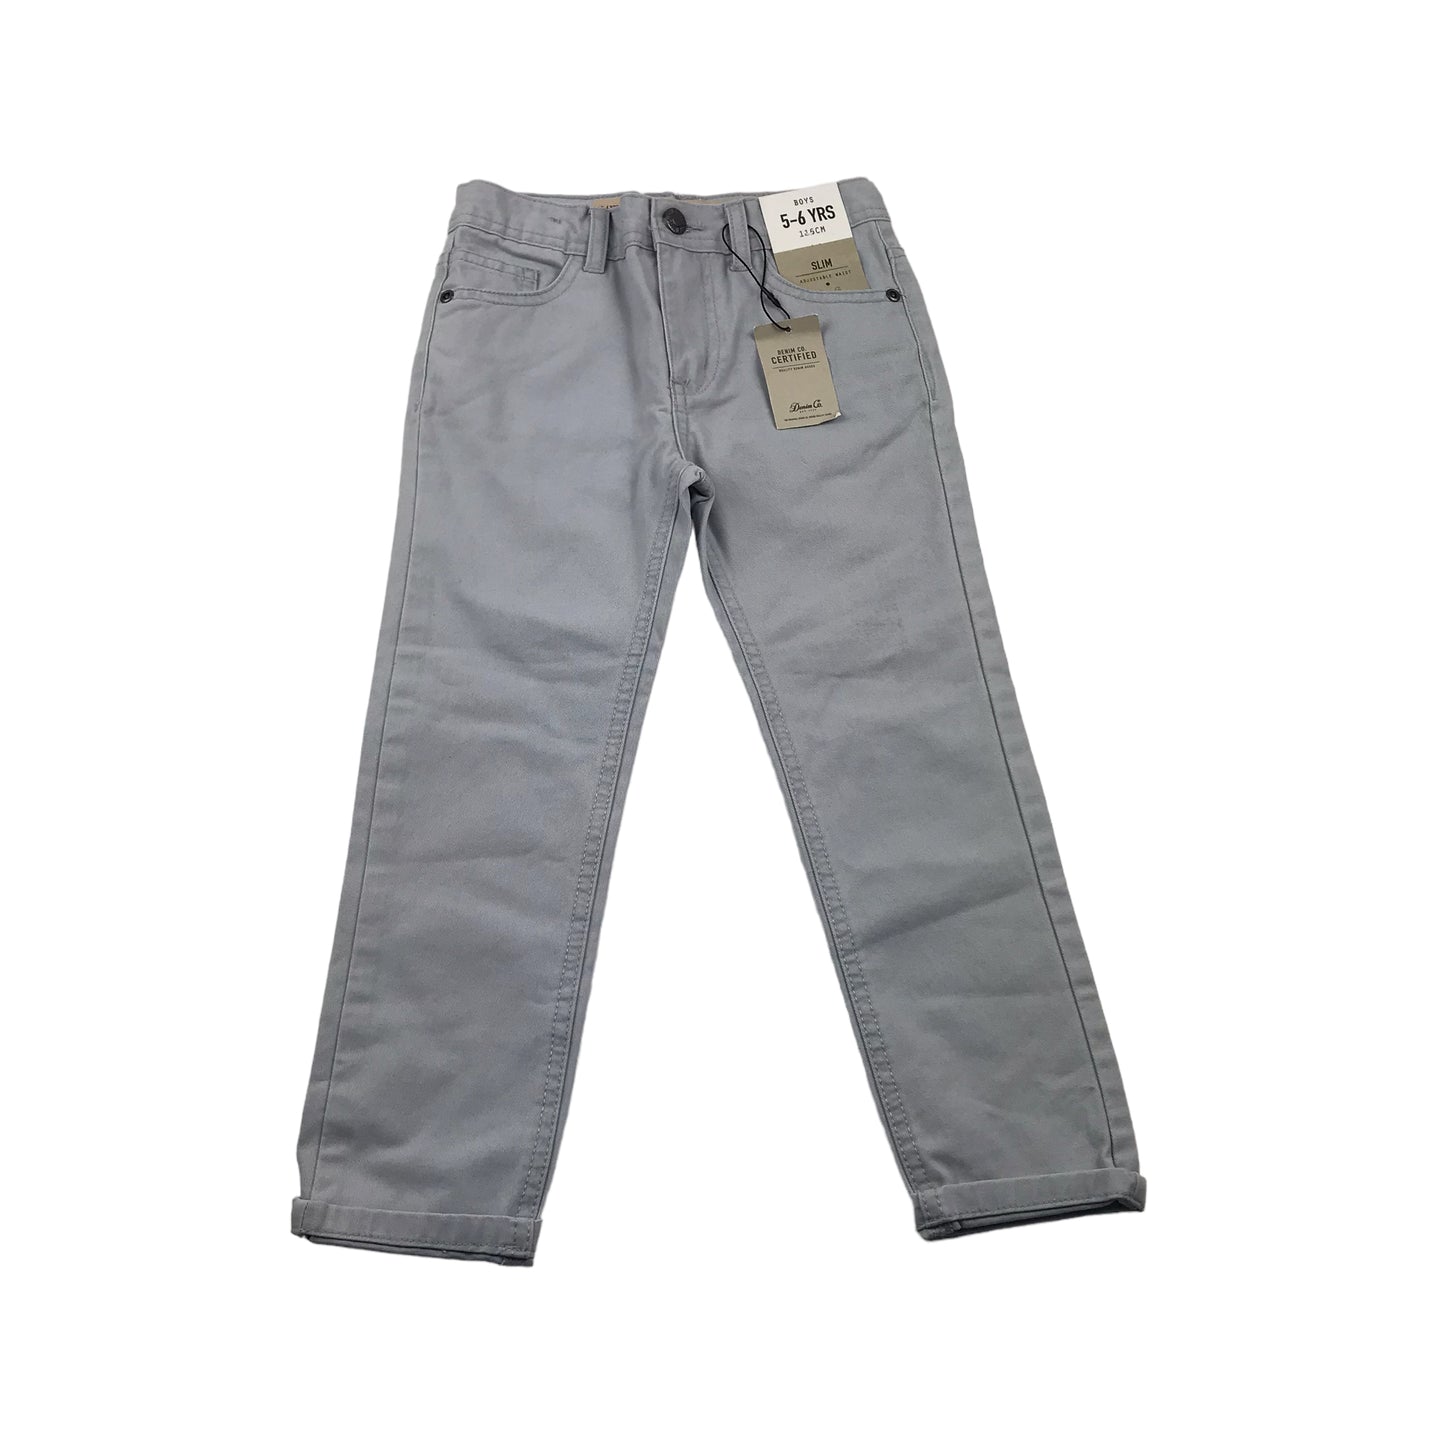 Primark Light Grey Chino Style Trousers Age 5